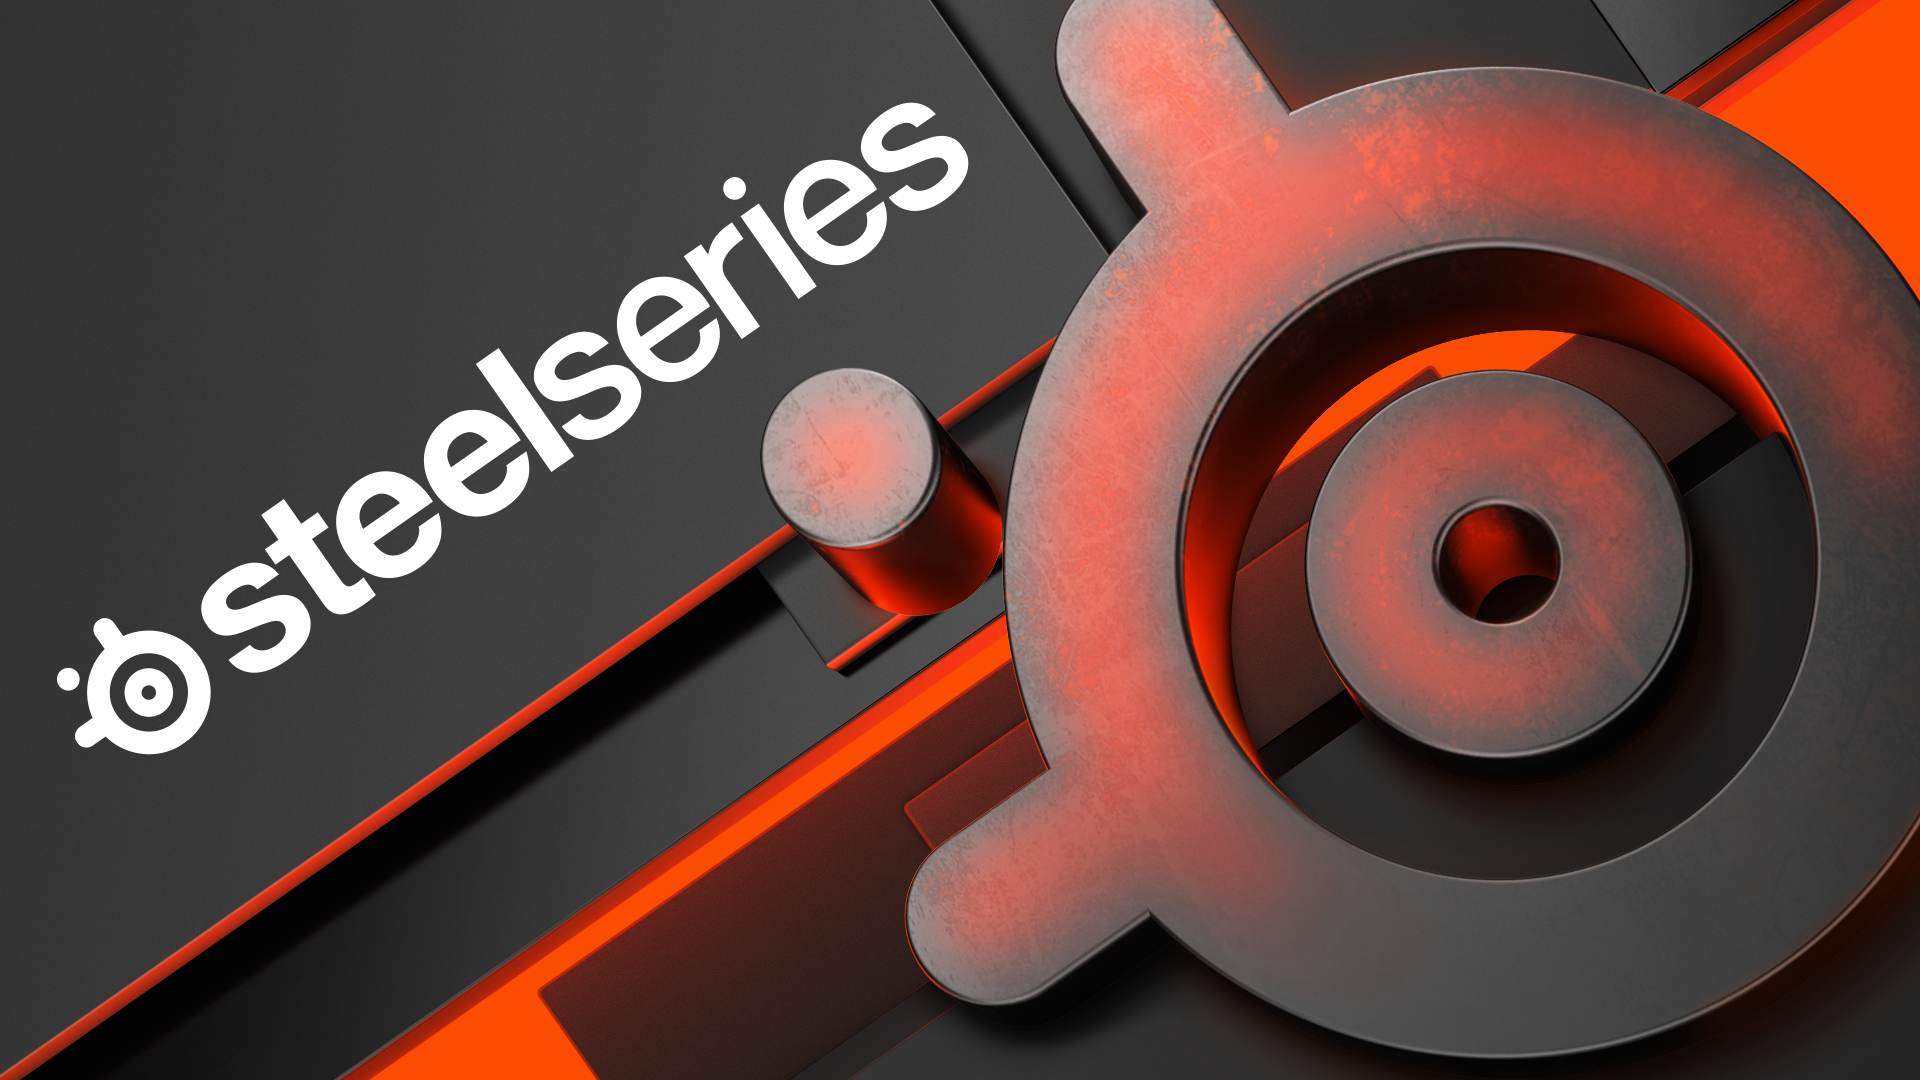 Steelseries Japan Steelseries Wallpaper Rise To The Challenge T Co Jrg9eurqfs Http T Co Rgtk8vlcqq Twitter